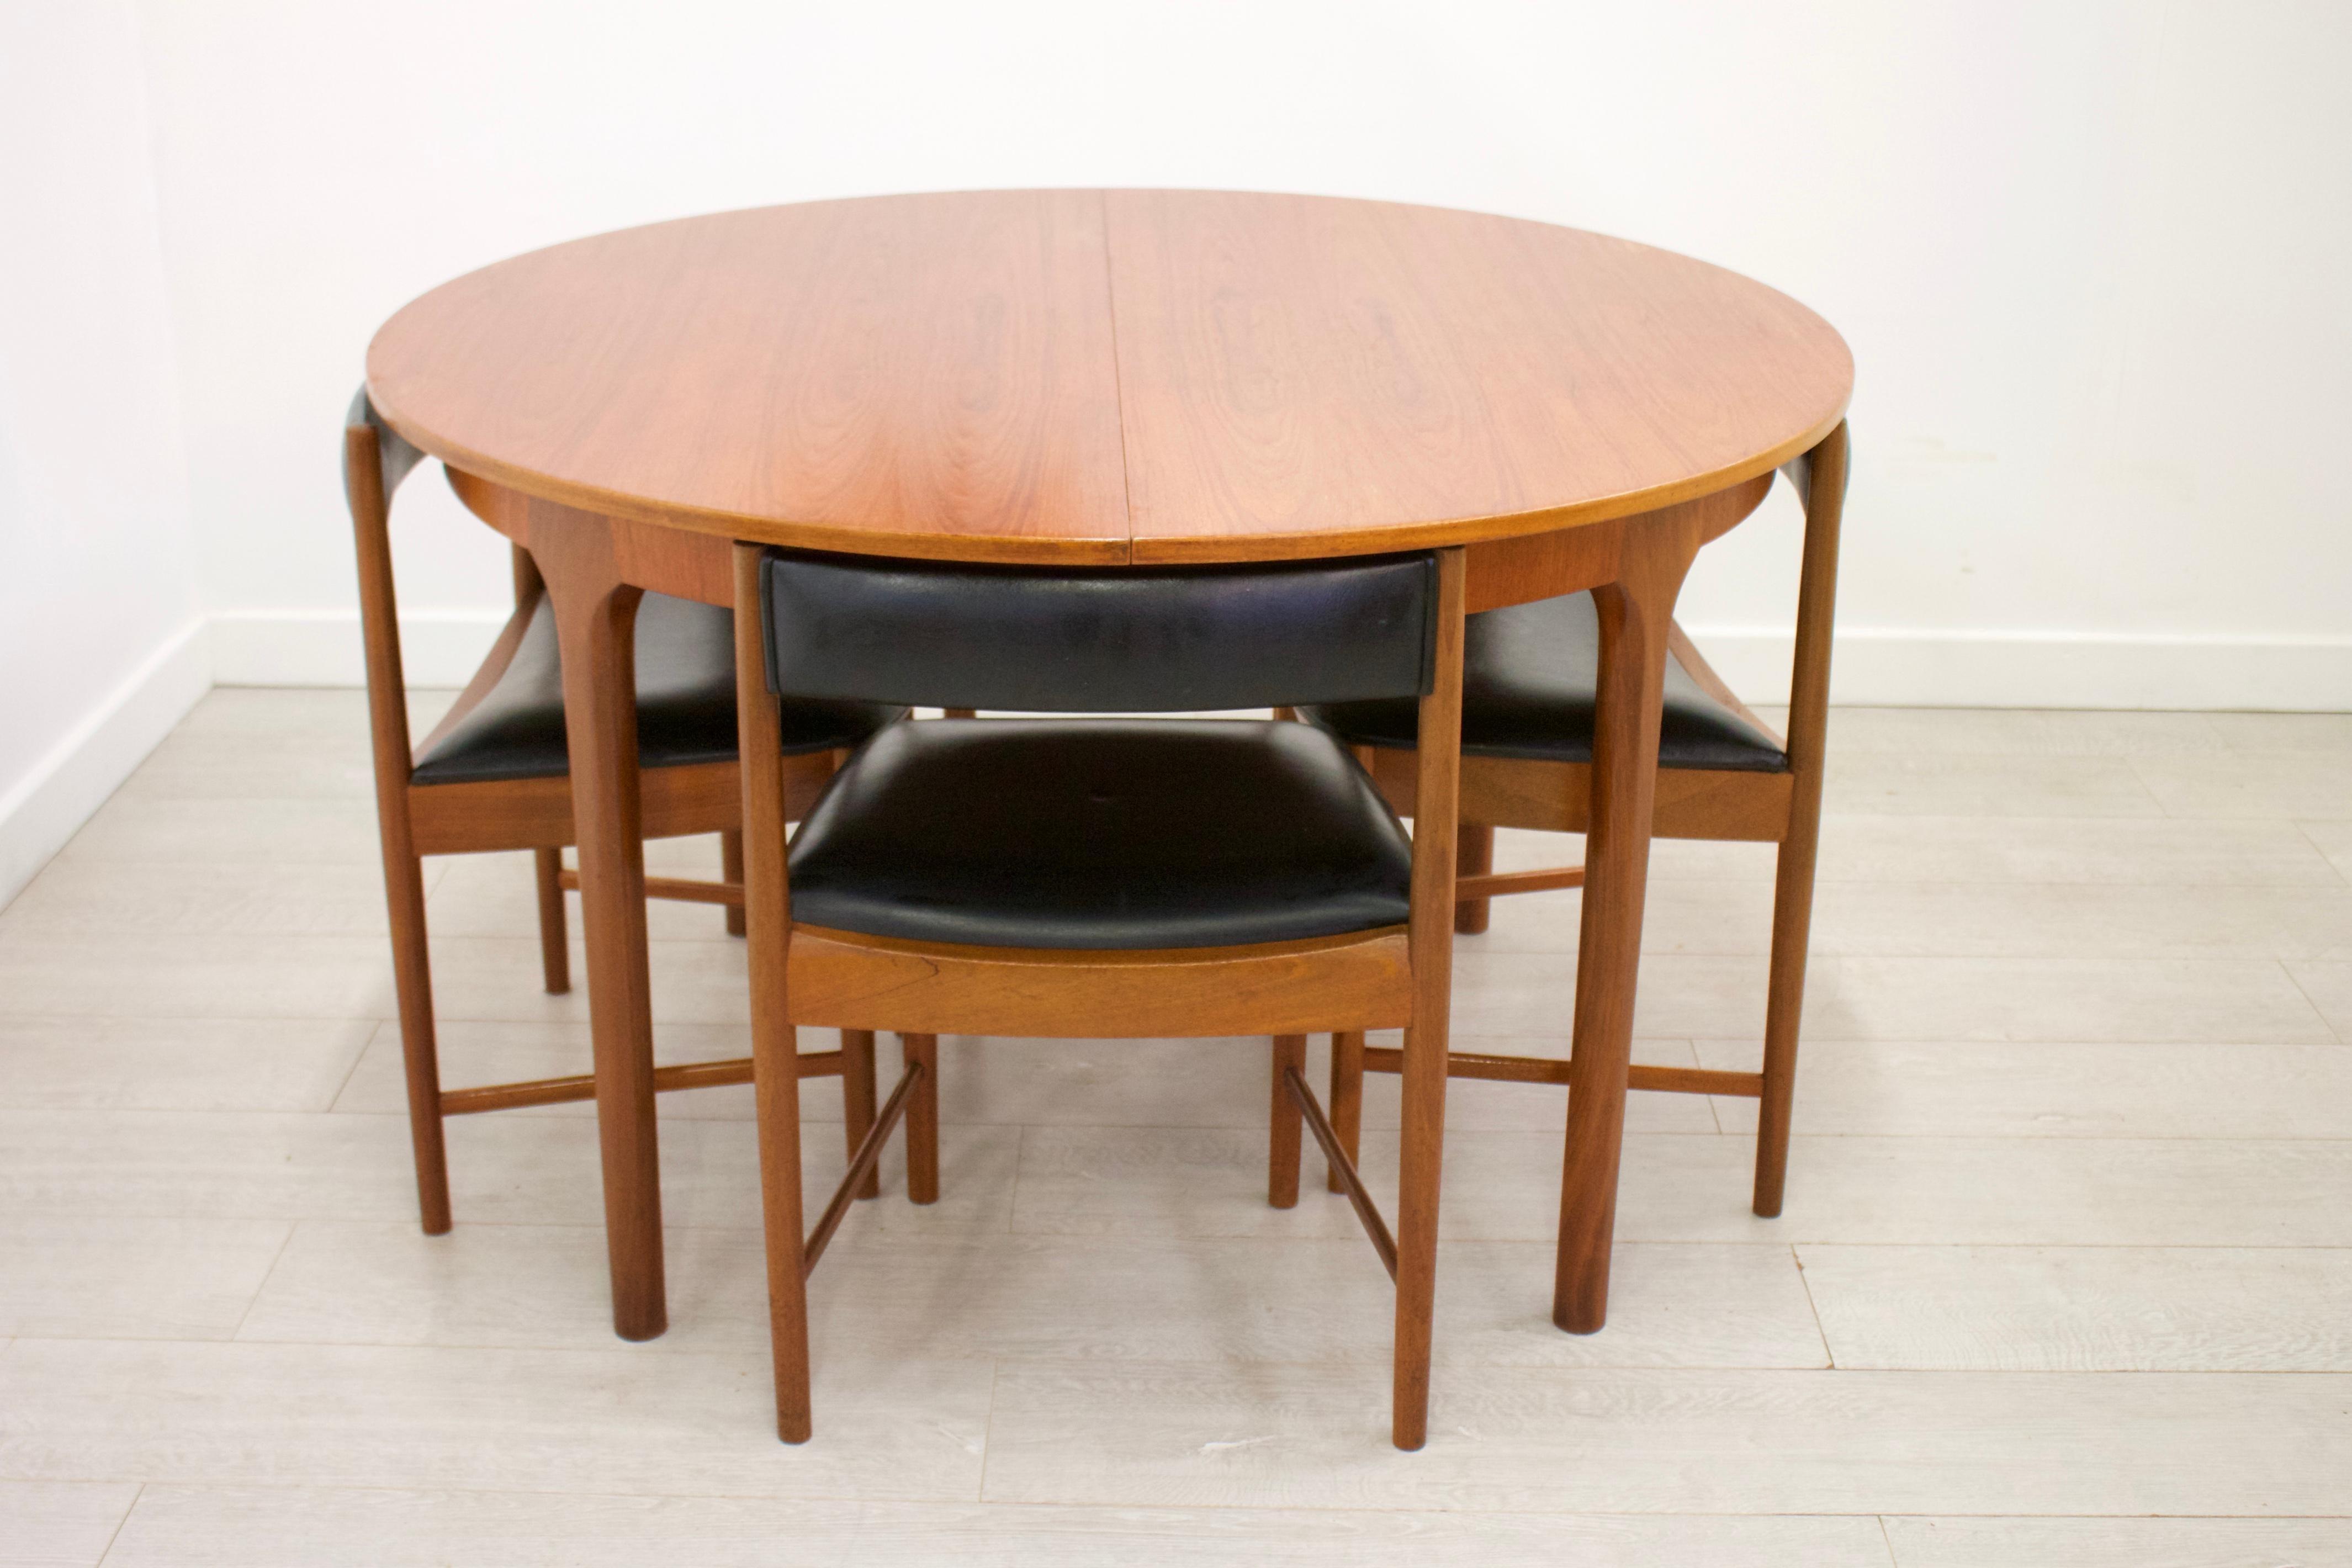 Mid-Century Modern Midcentury Teak Extendable Dining Table with 4 Chairs from McIntosh, 1960s